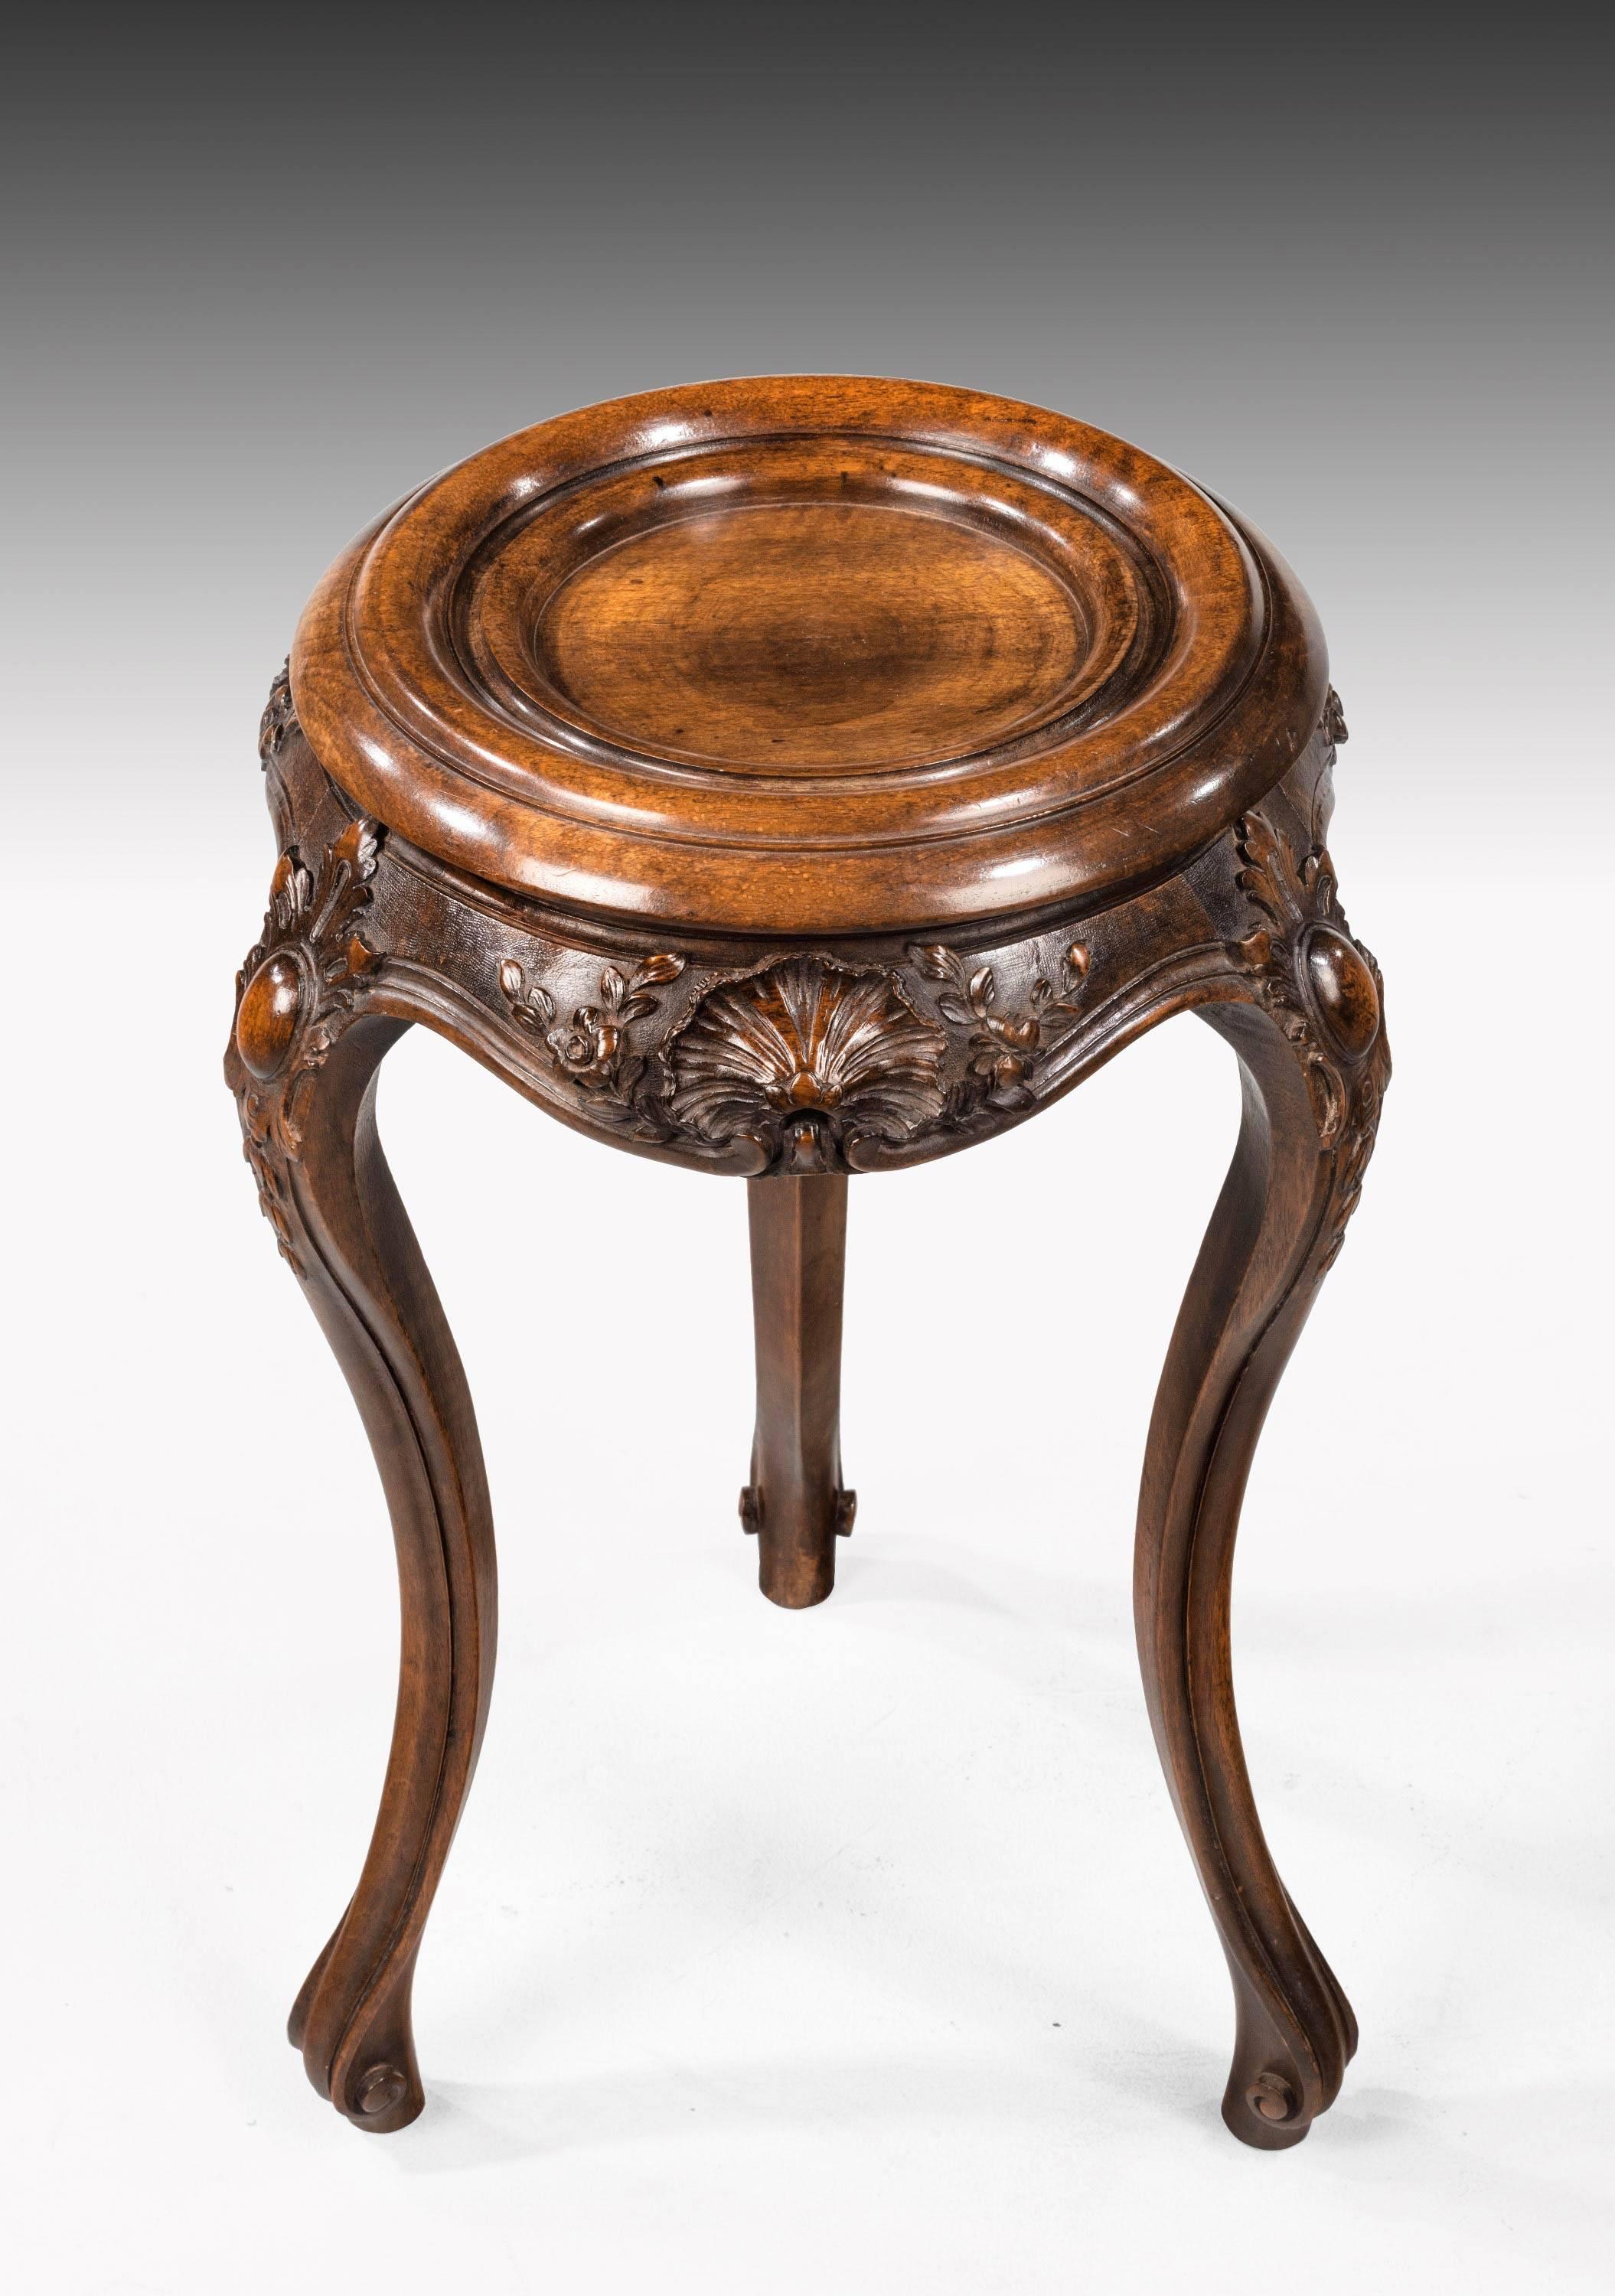 English Pair of Mid-19th Century Walnut Bowl or Vase Stands